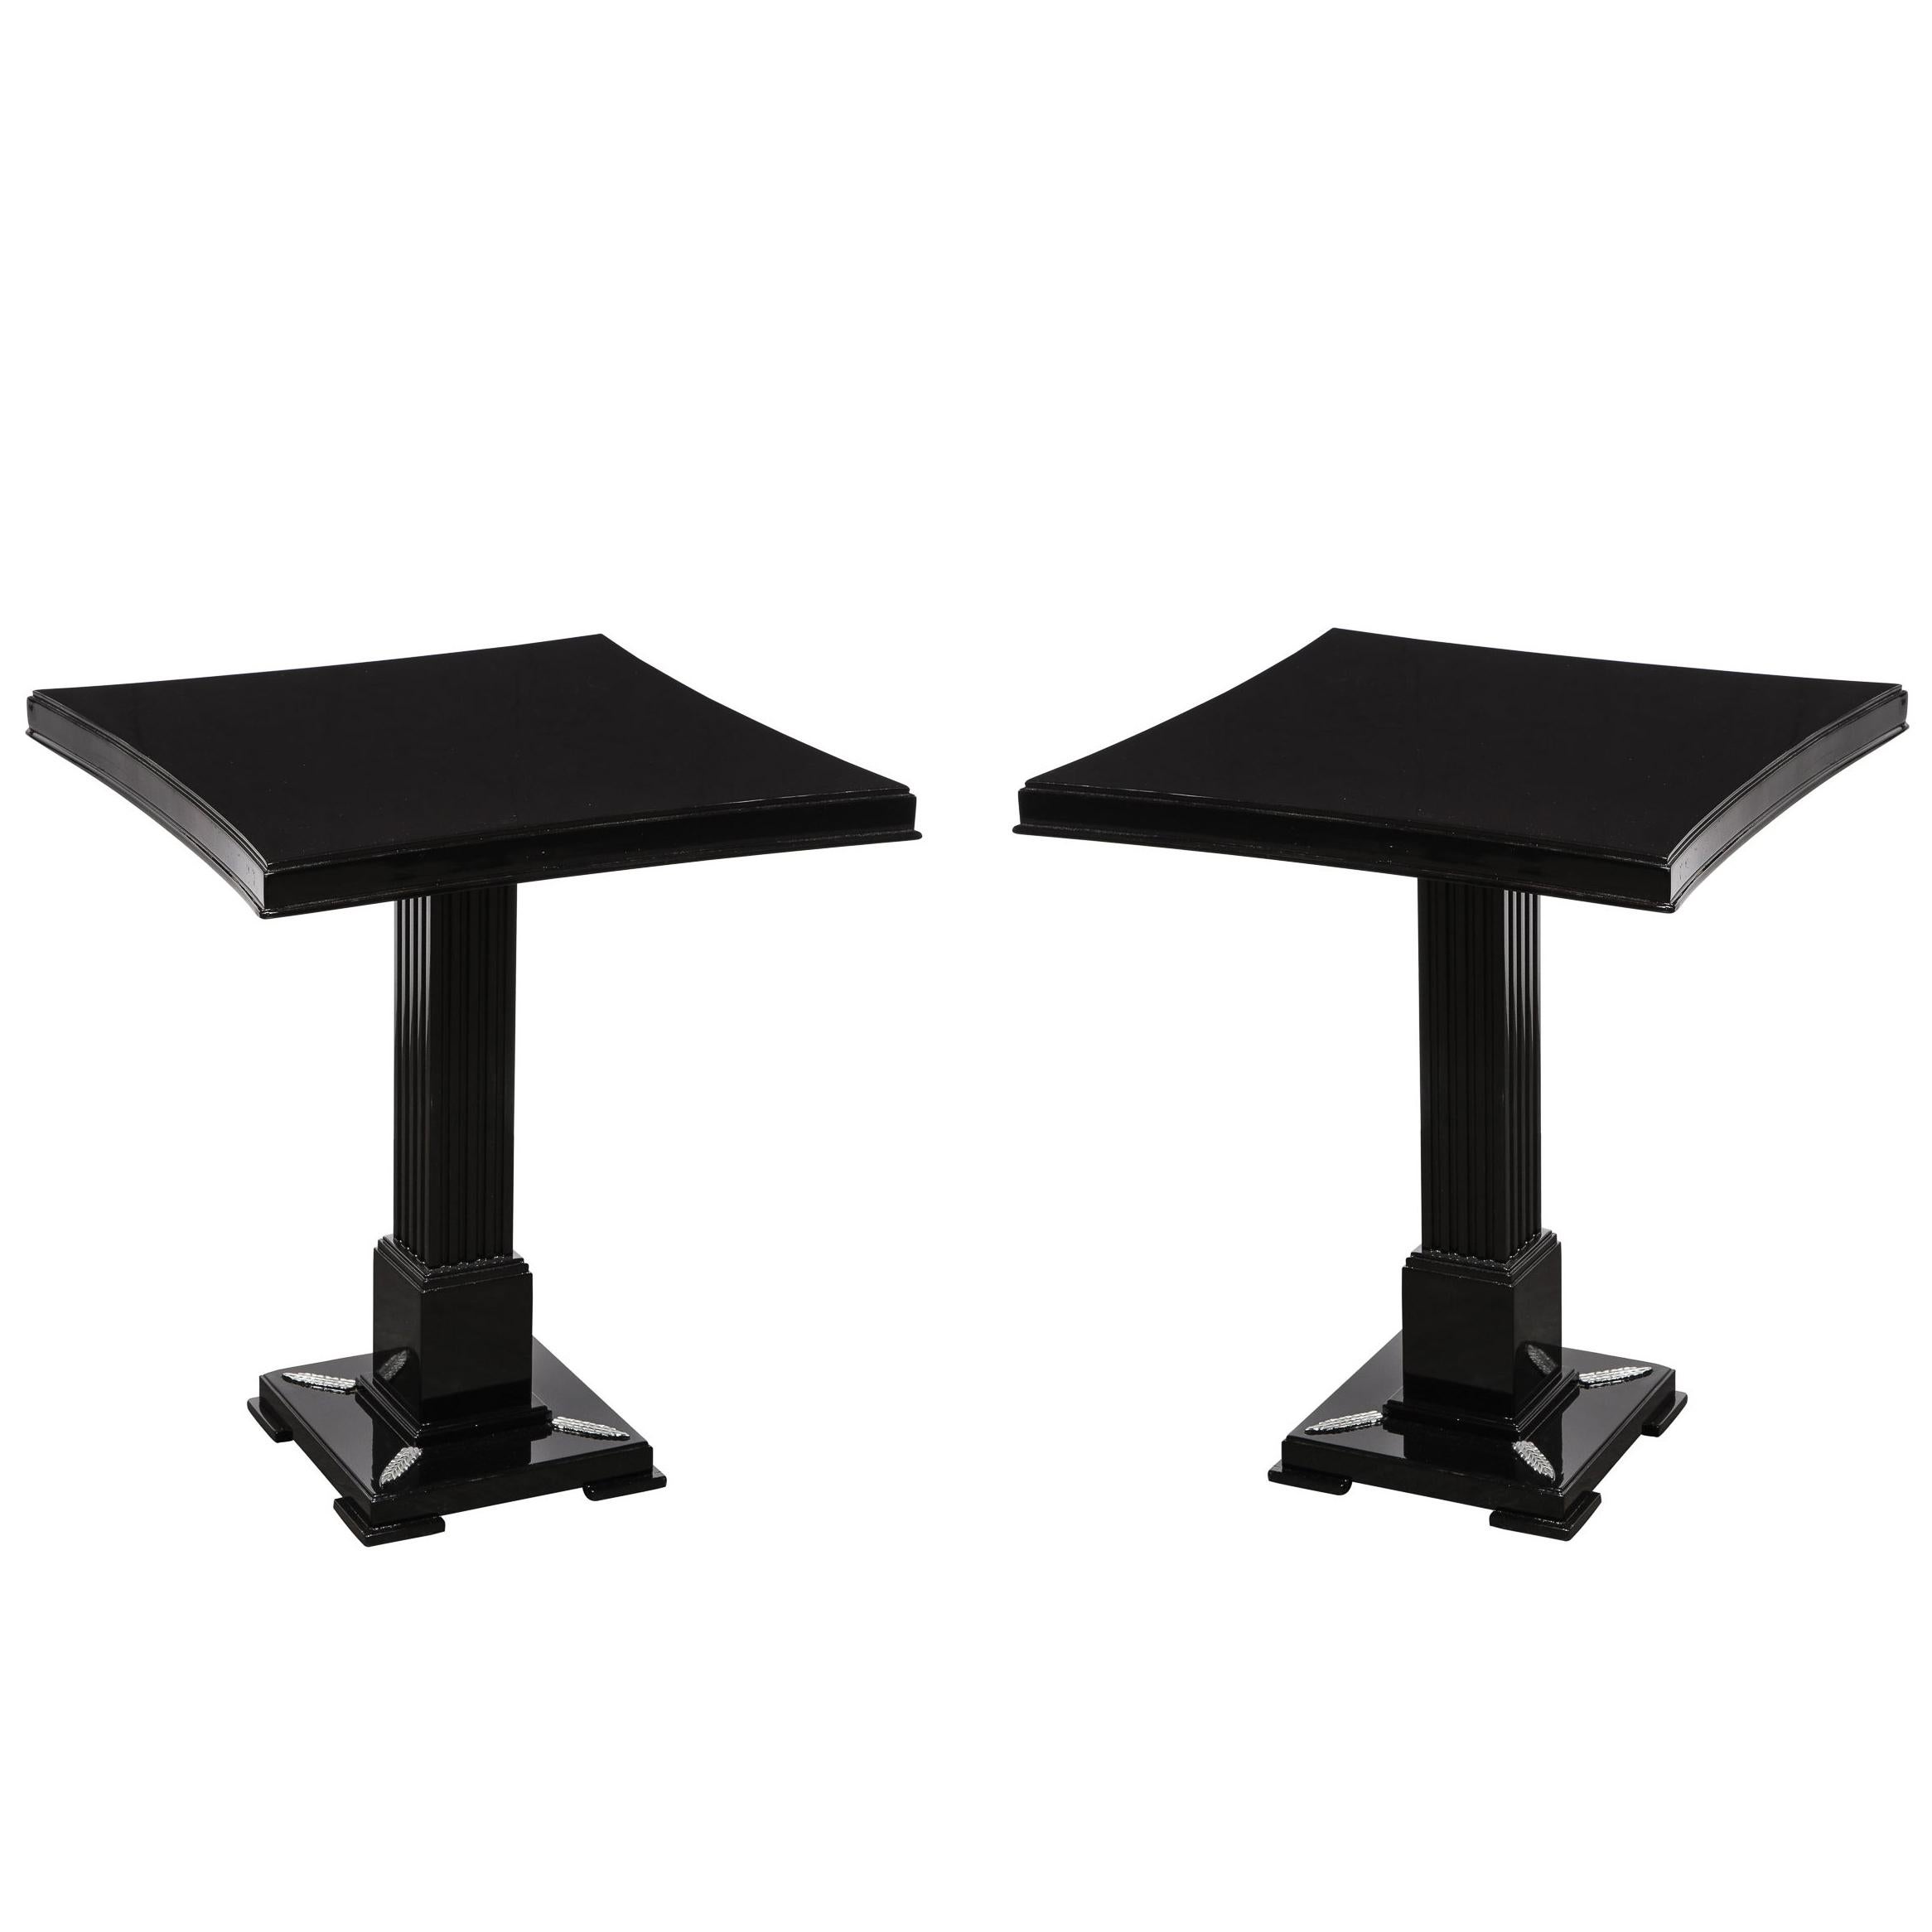 Pair of Occasional Tables in Black Lacquer with Pedestal Bases by Grosfeld House For Sale